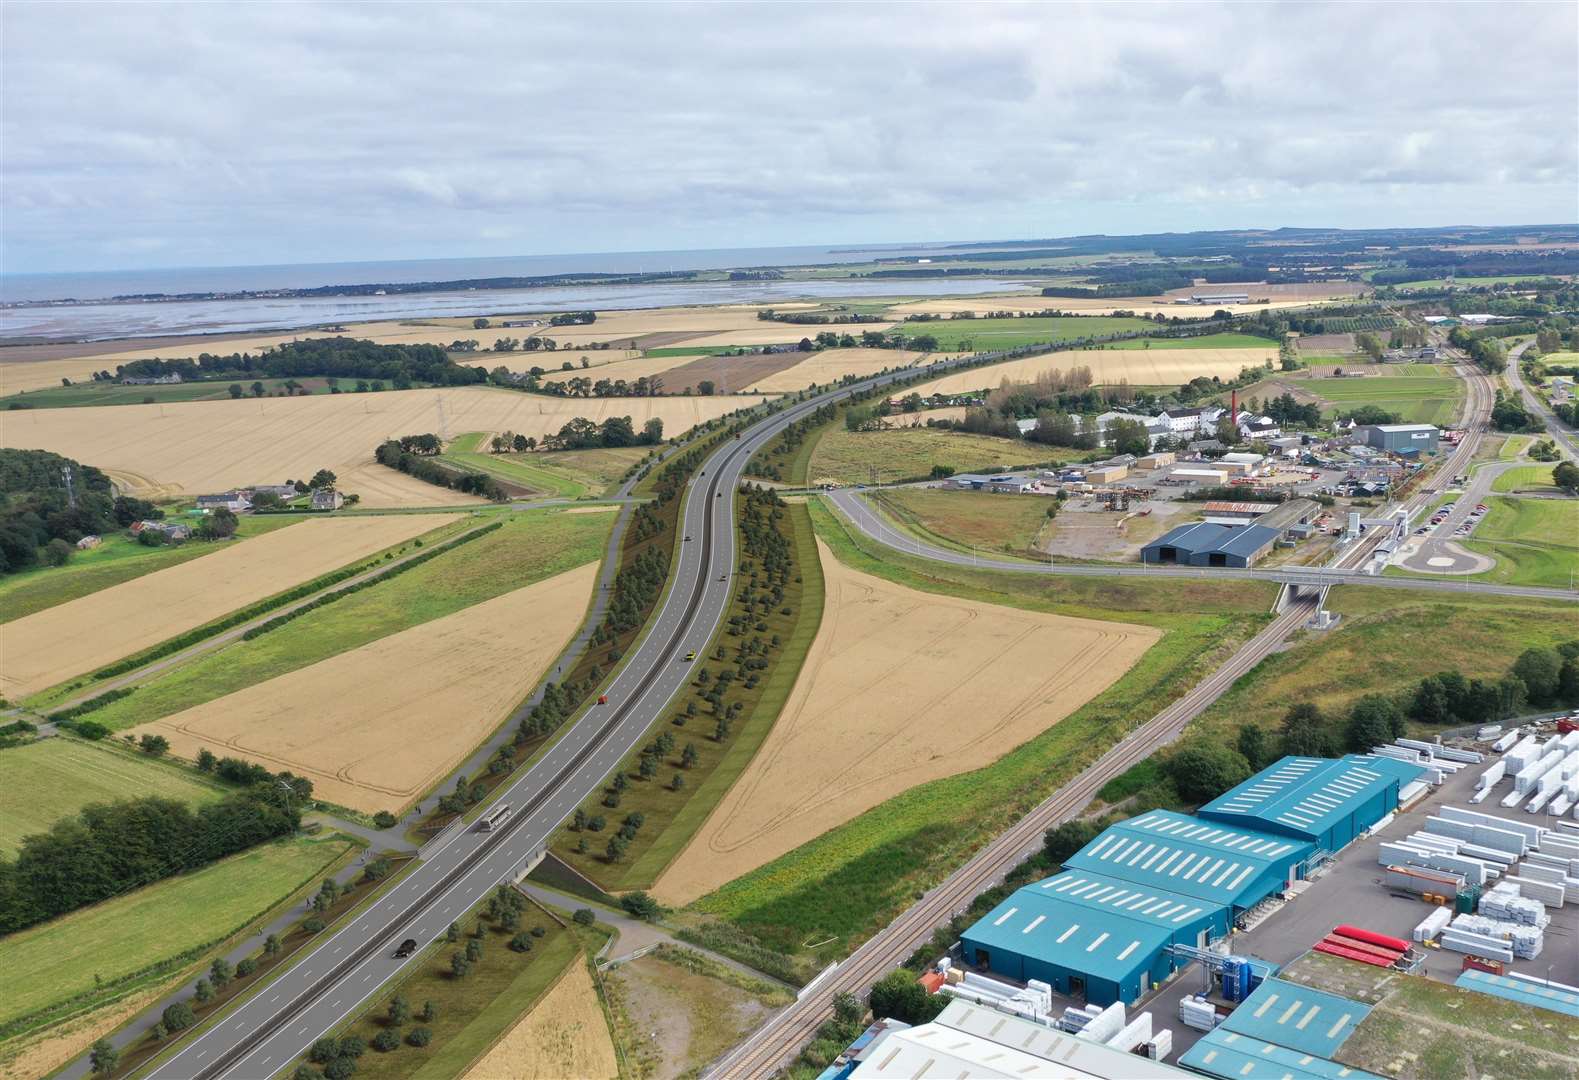 The plans to dual the road in Moray have been confirmed since 2018.